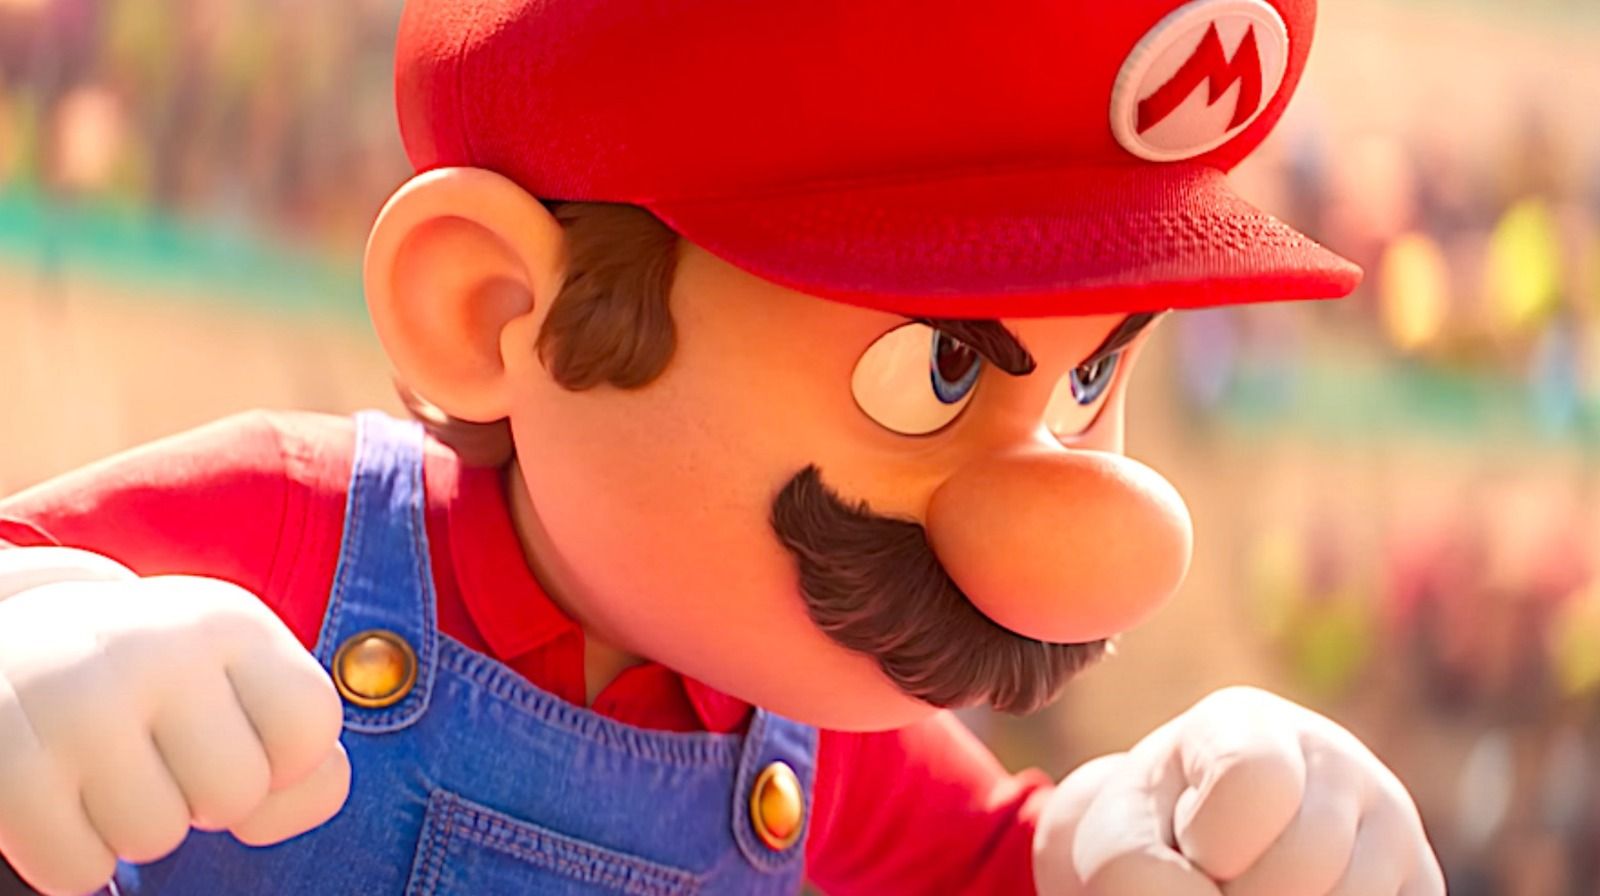 A New Mario Game May Be Revealed In An Nintendo Direct, Says